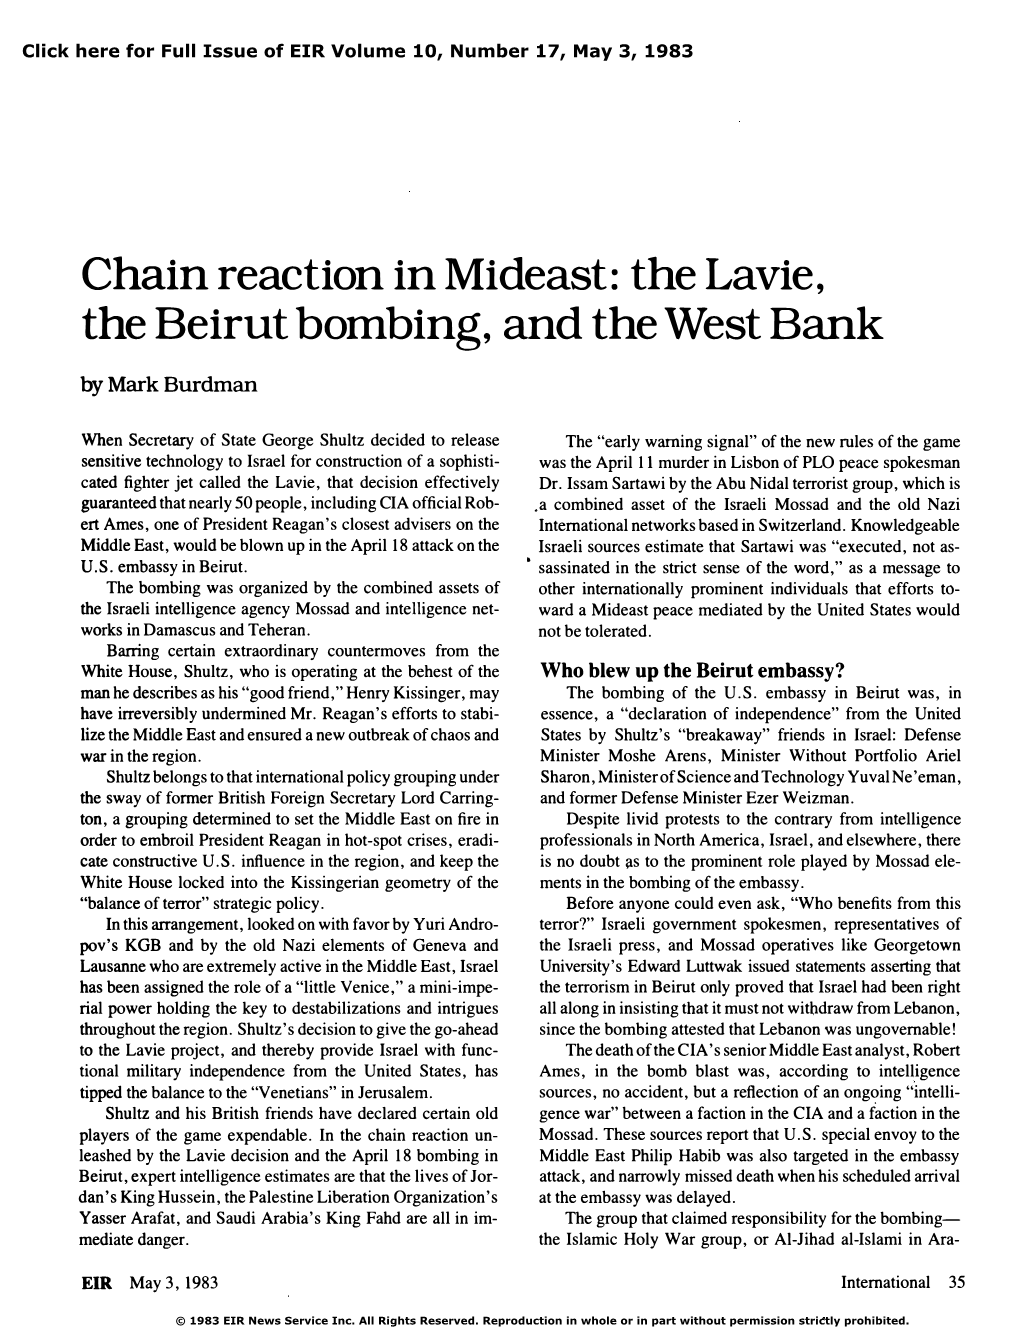 Chain Reaction in Mideast: the Lavie, the Beirut Bombing, and the West Bank